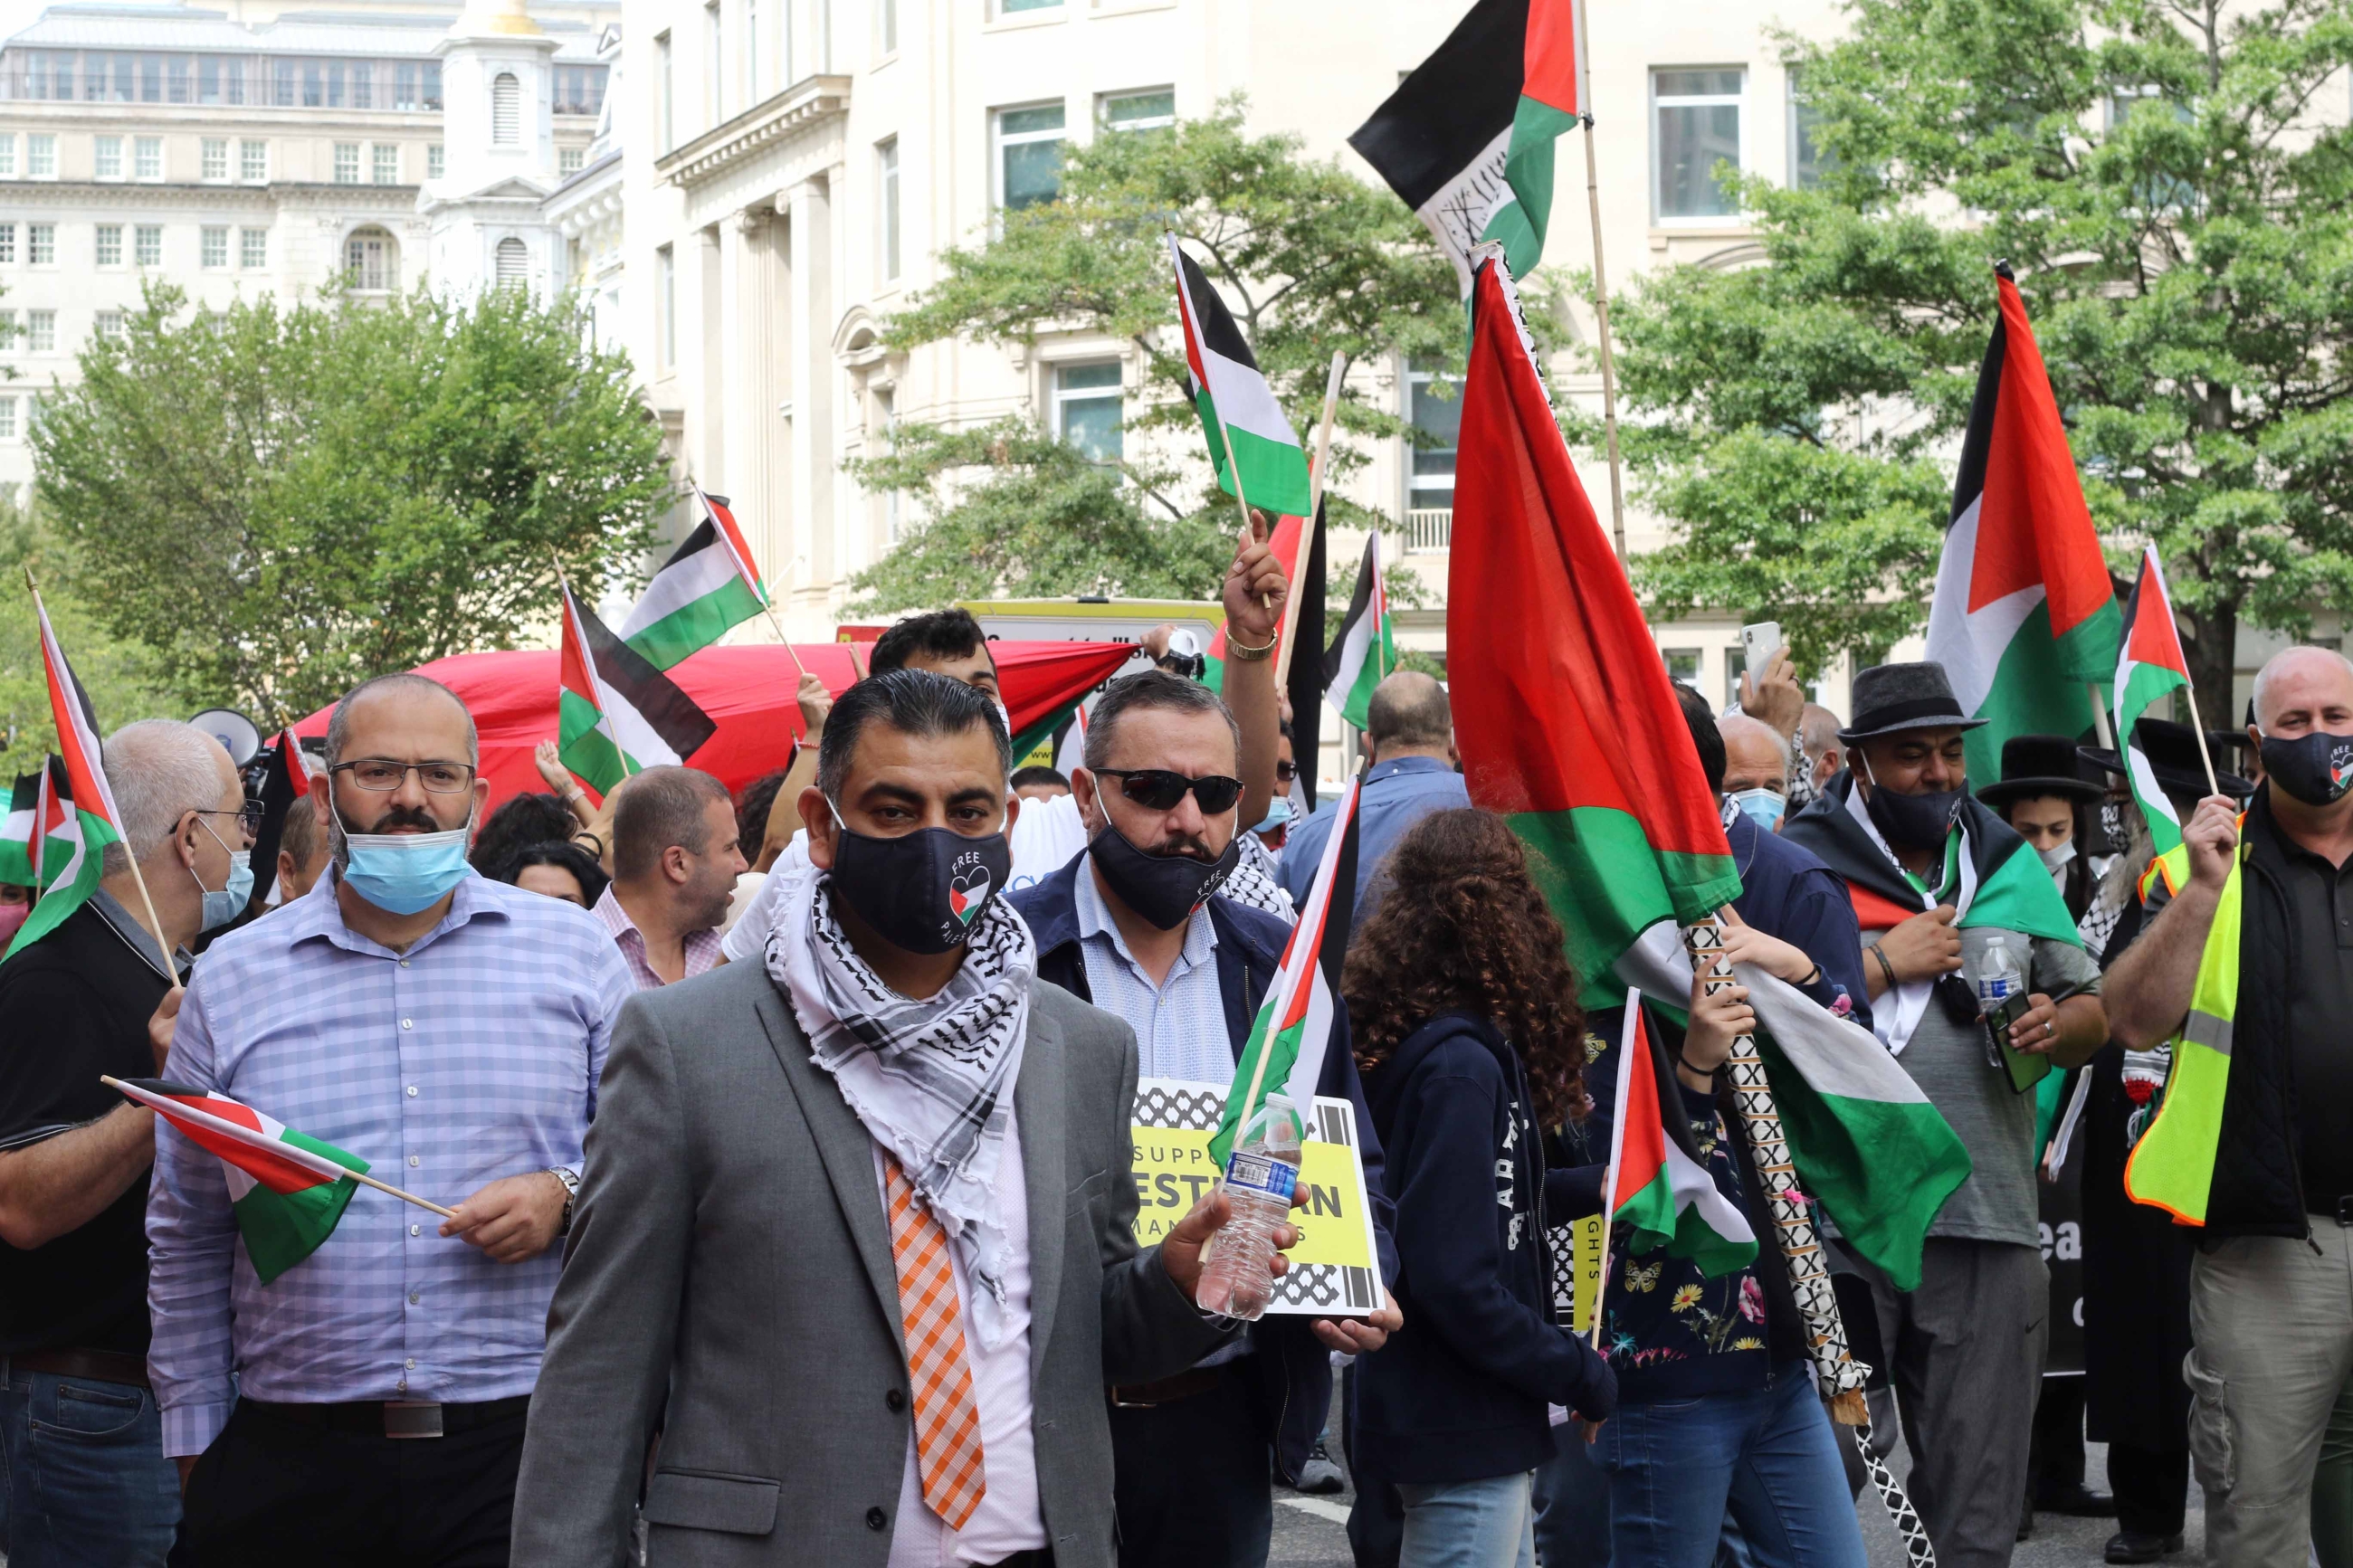 The protesters marched on the streets just outside the White House, waving Palestinian flags and chanting 'Free Palestine'.